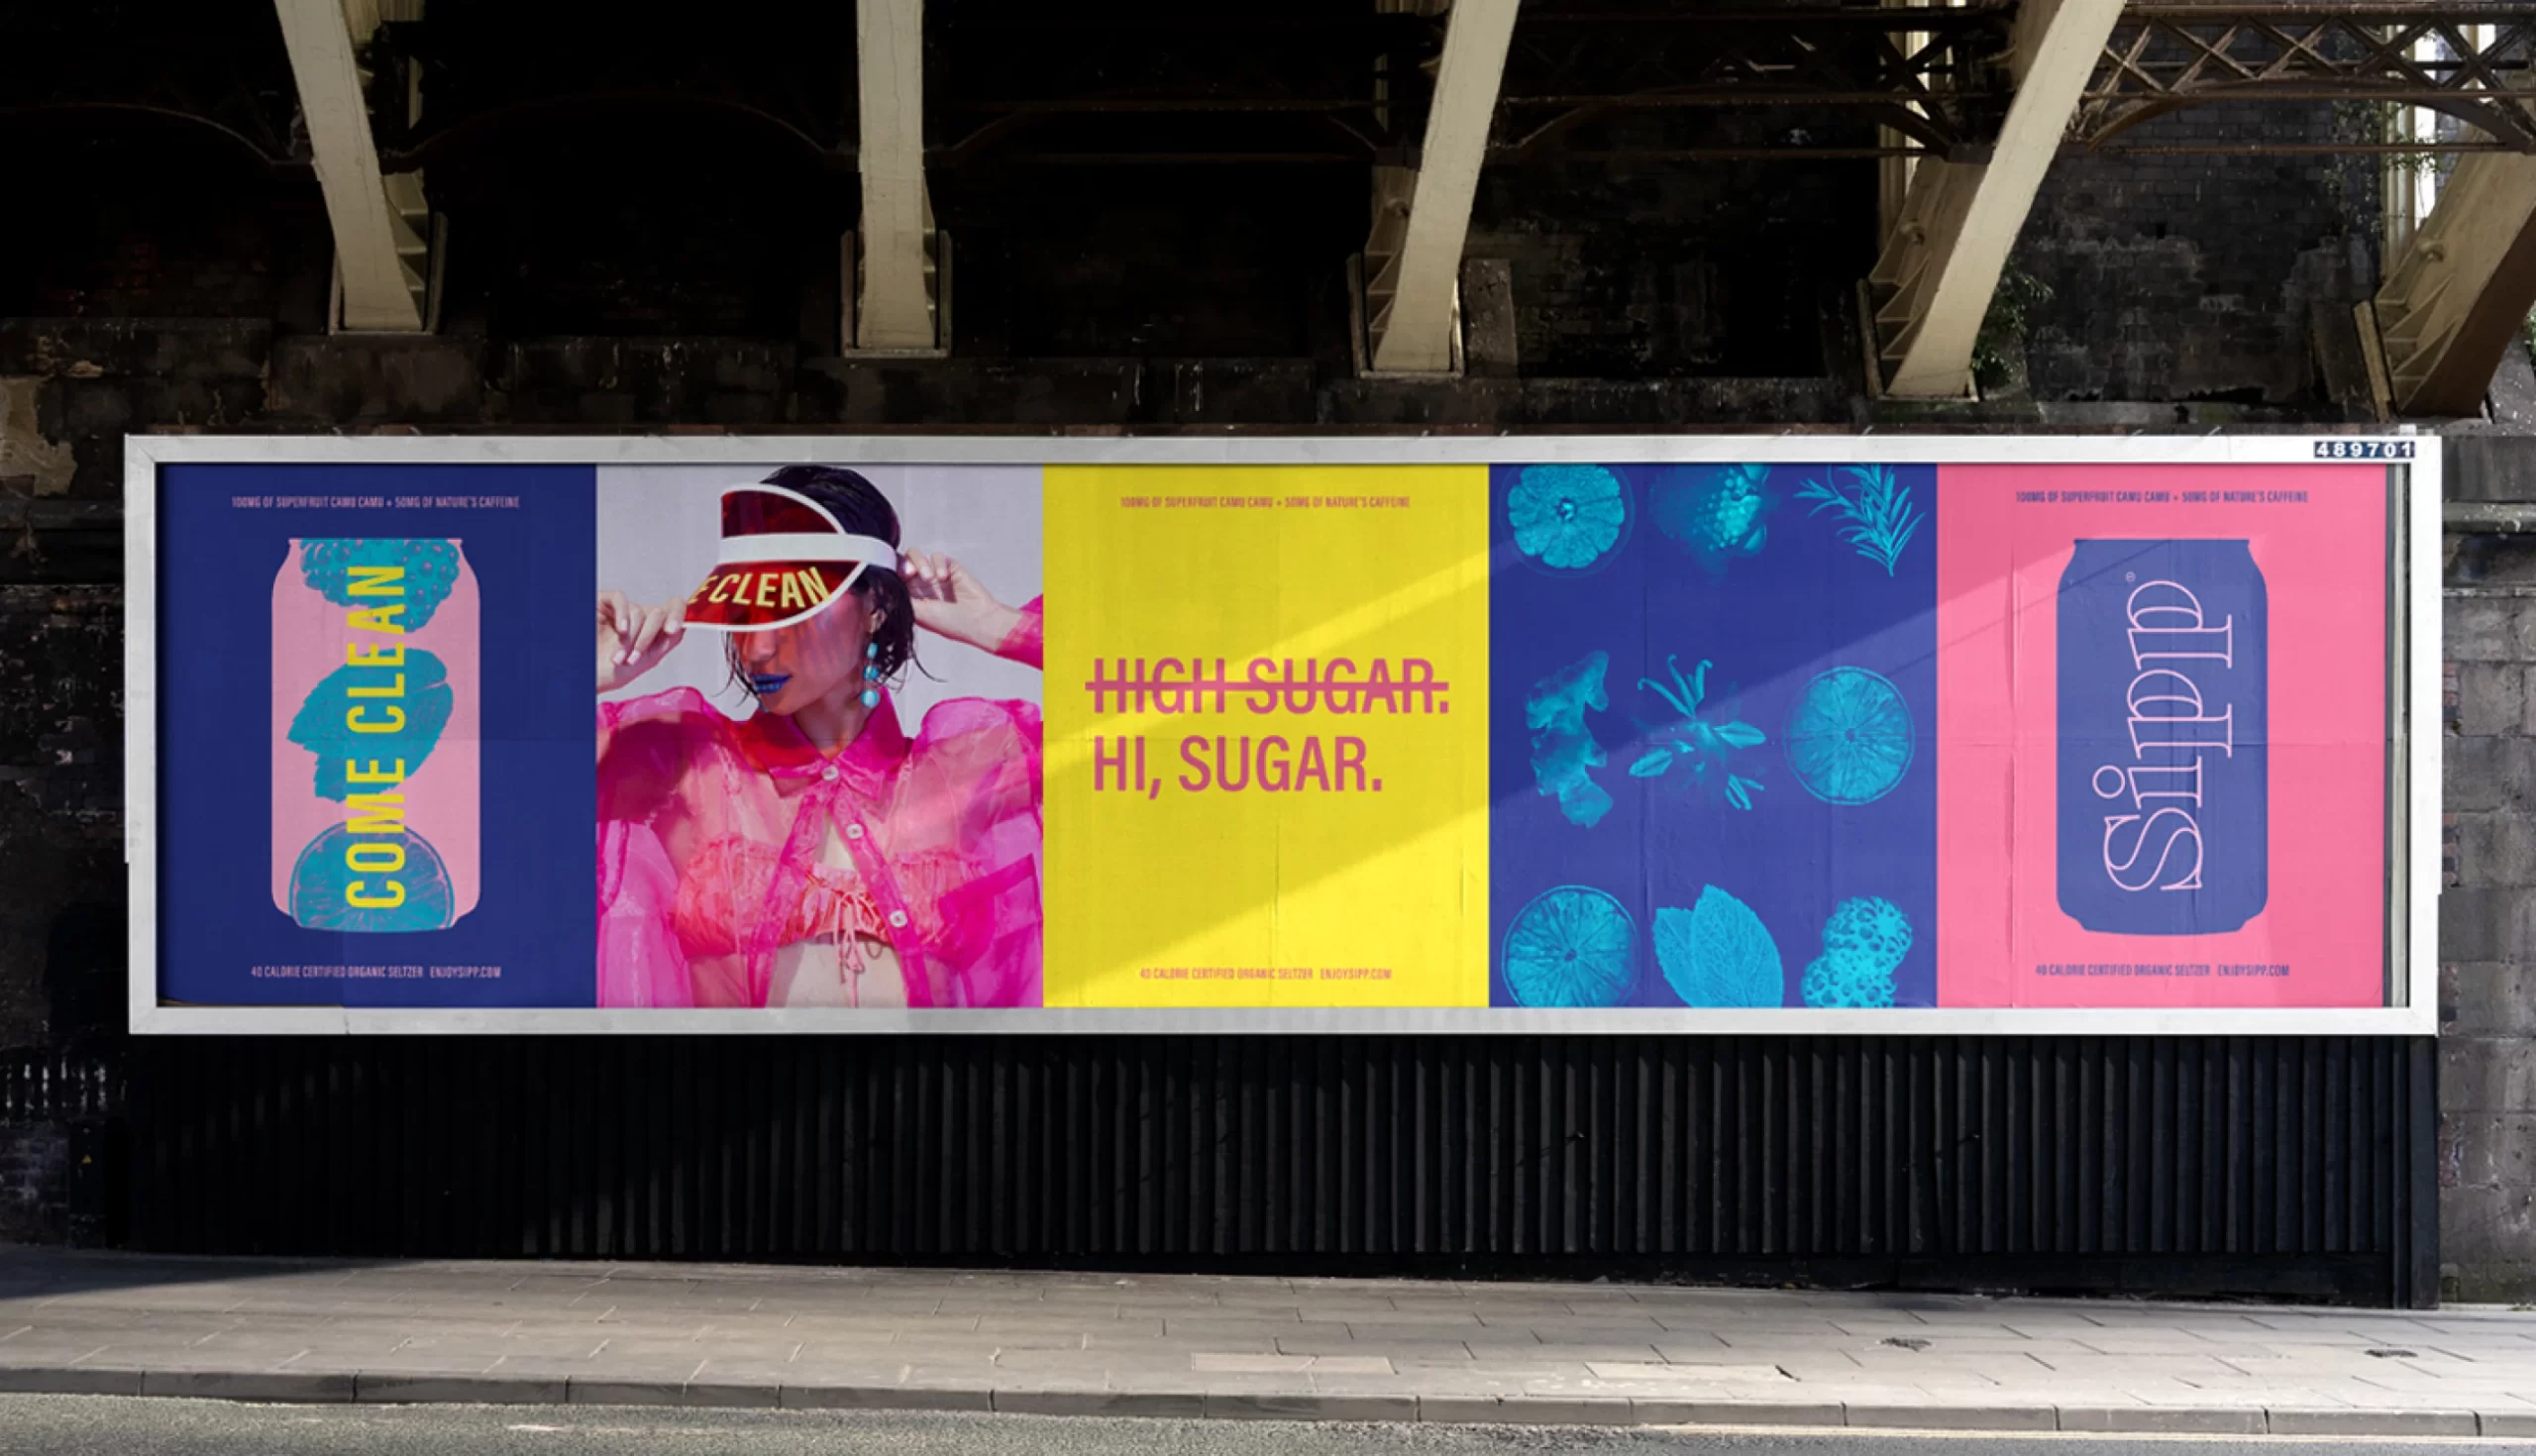 Colorful Sipp out-of-home advertising poster designs on street